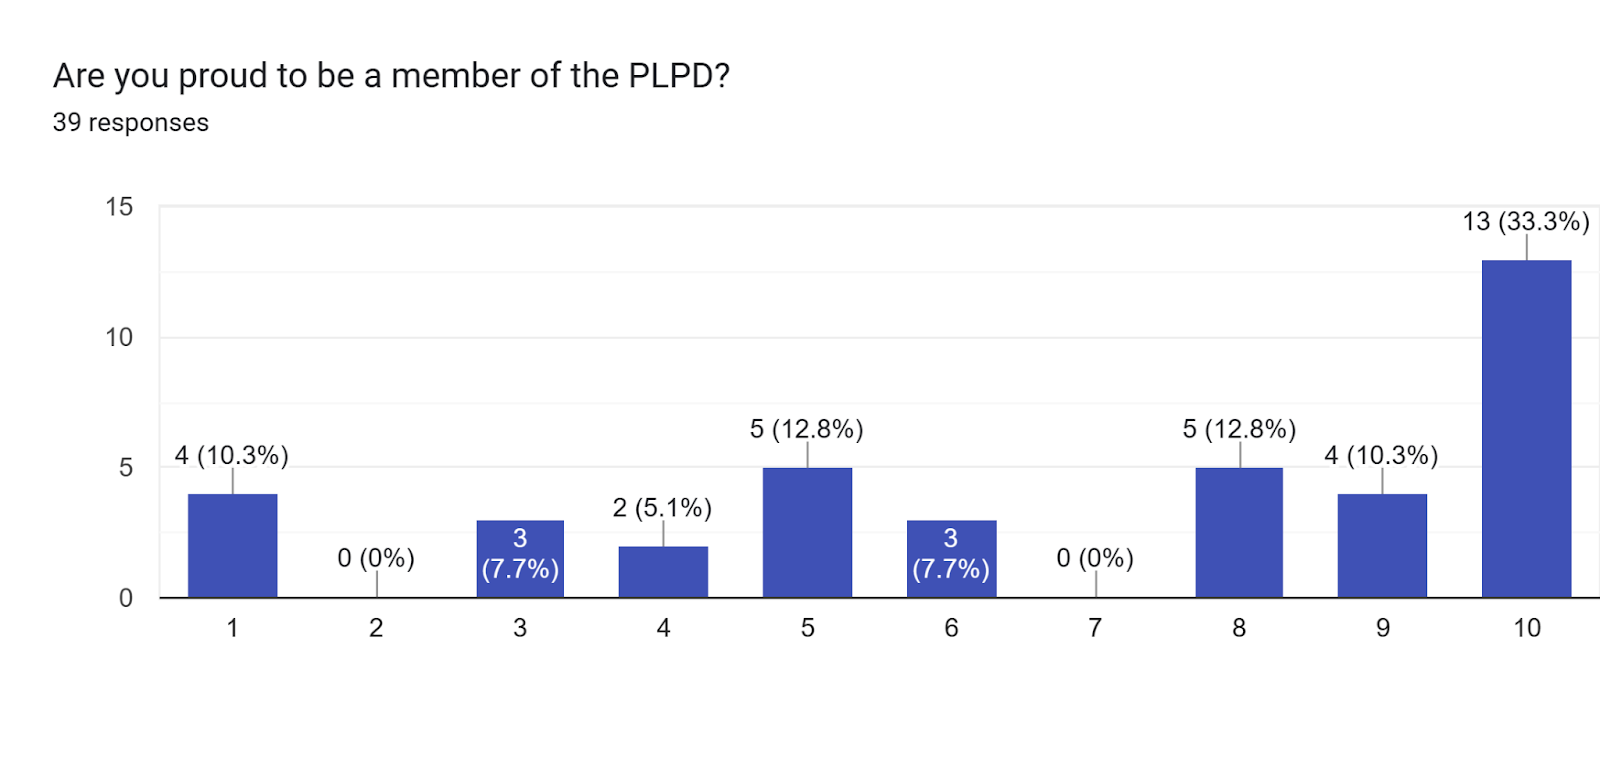 Forms response chart. Question title: Are you proud to be a member of the PLPD?. Number of responses: 39 responses.